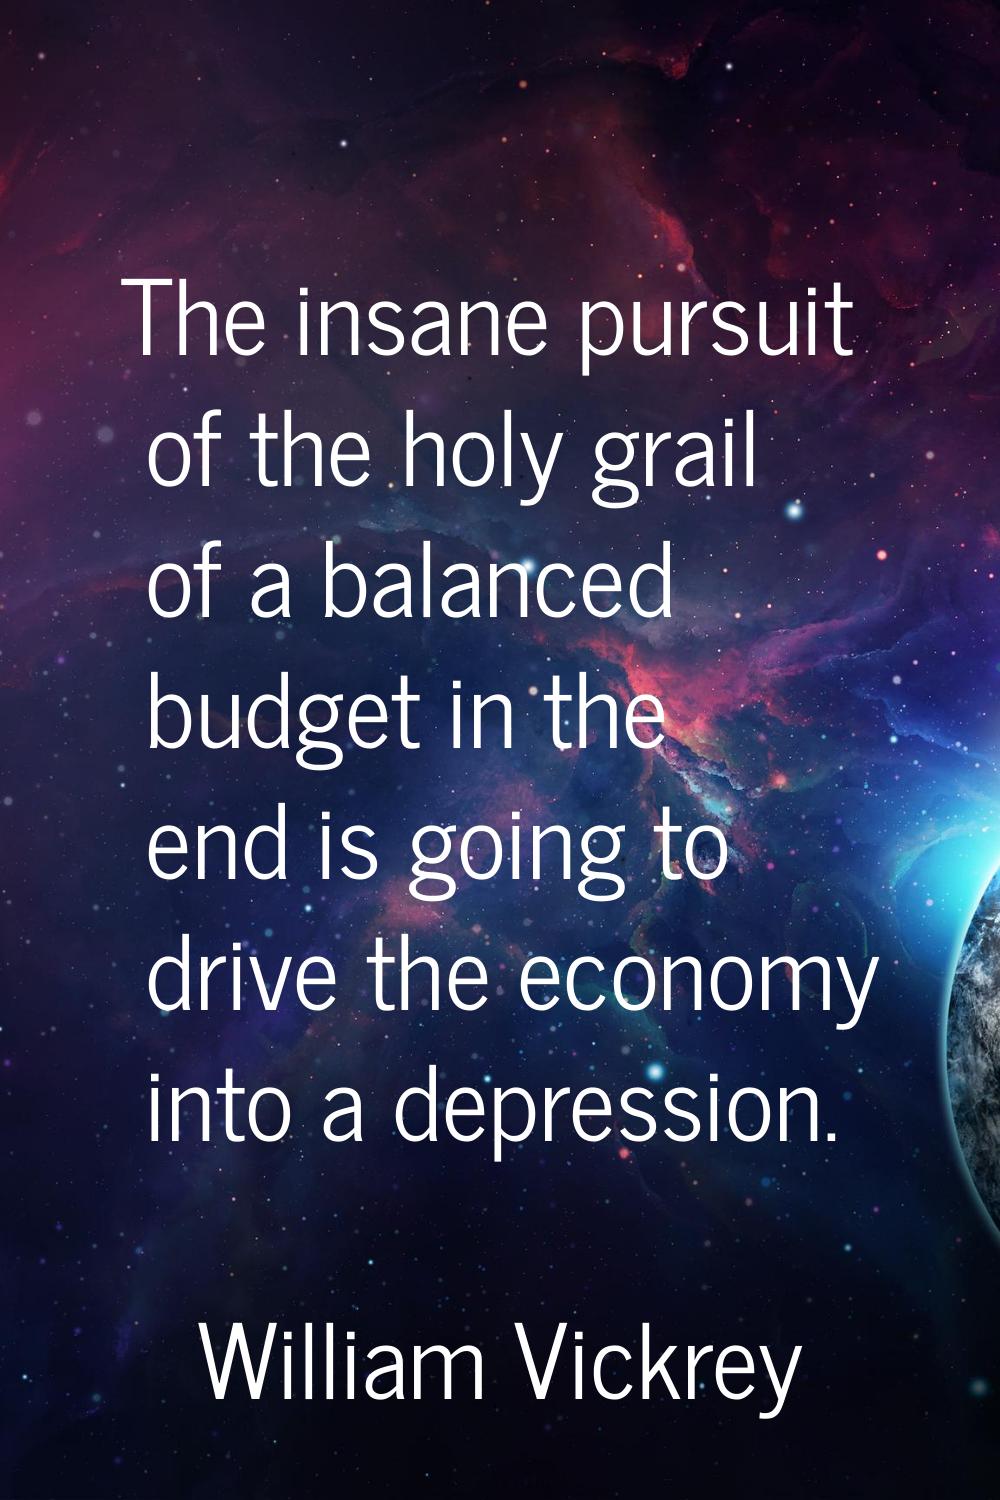 The insane pursuit of the holy grail of a balanced budget in the end is going to drive the economy 